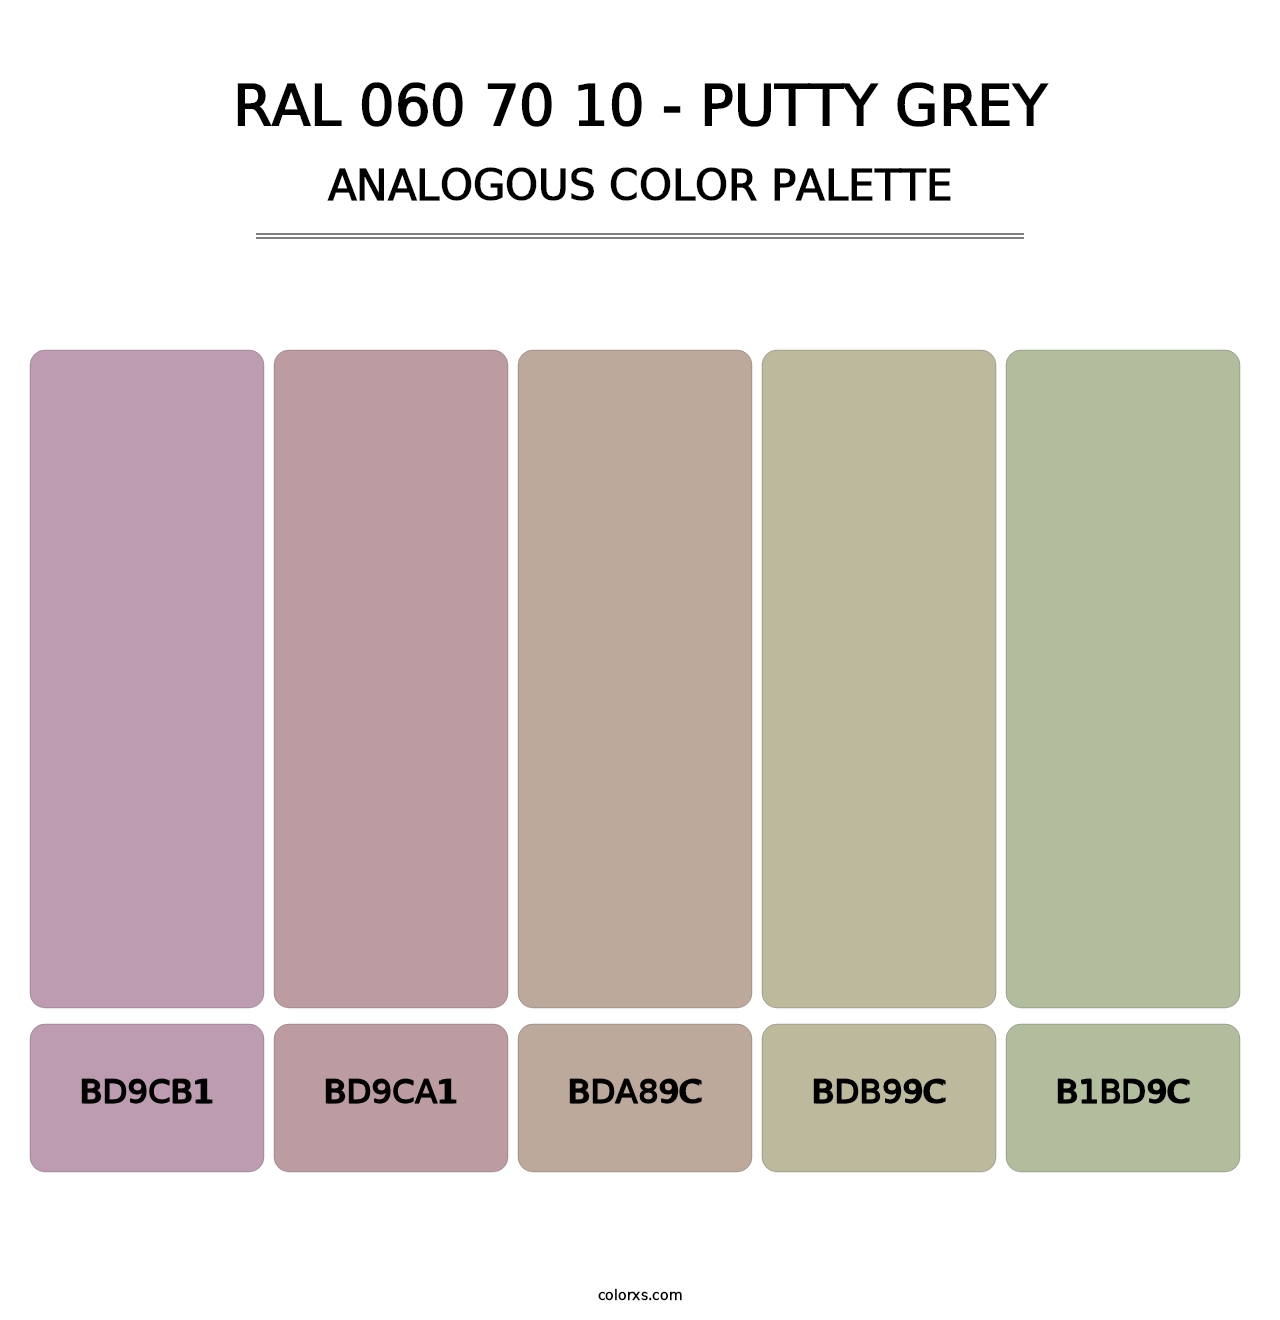 RAL 060 70 10 - Putty Grey - Analogous Color Palette